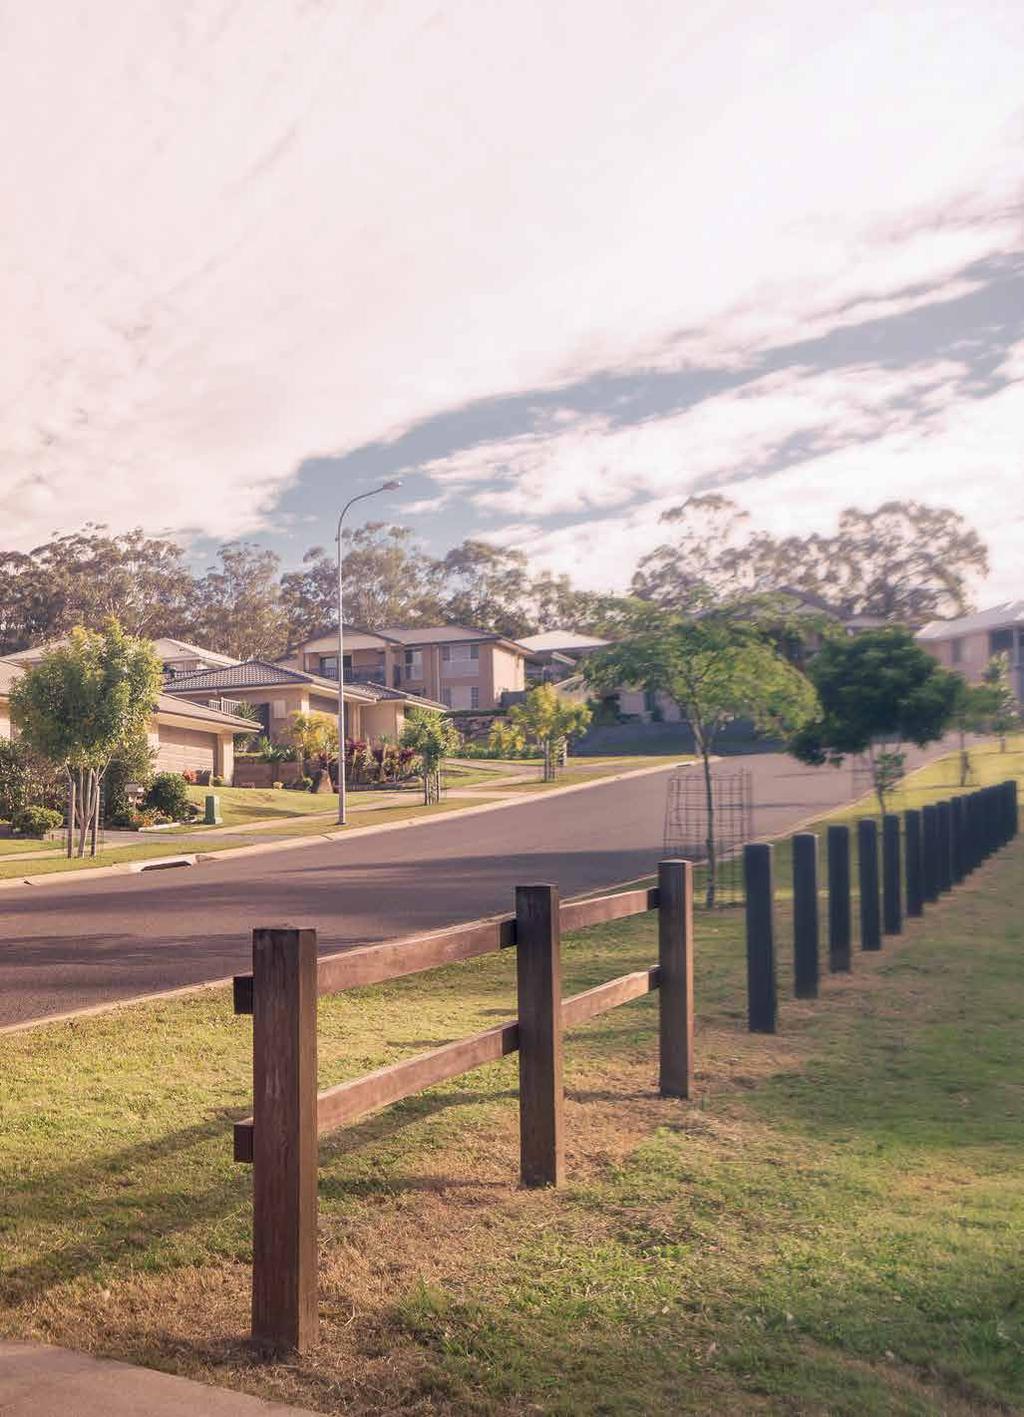 A warm community to welcome you Begin building your new life in this relaxed new neighbourhood in a prime Coffs Coast position.